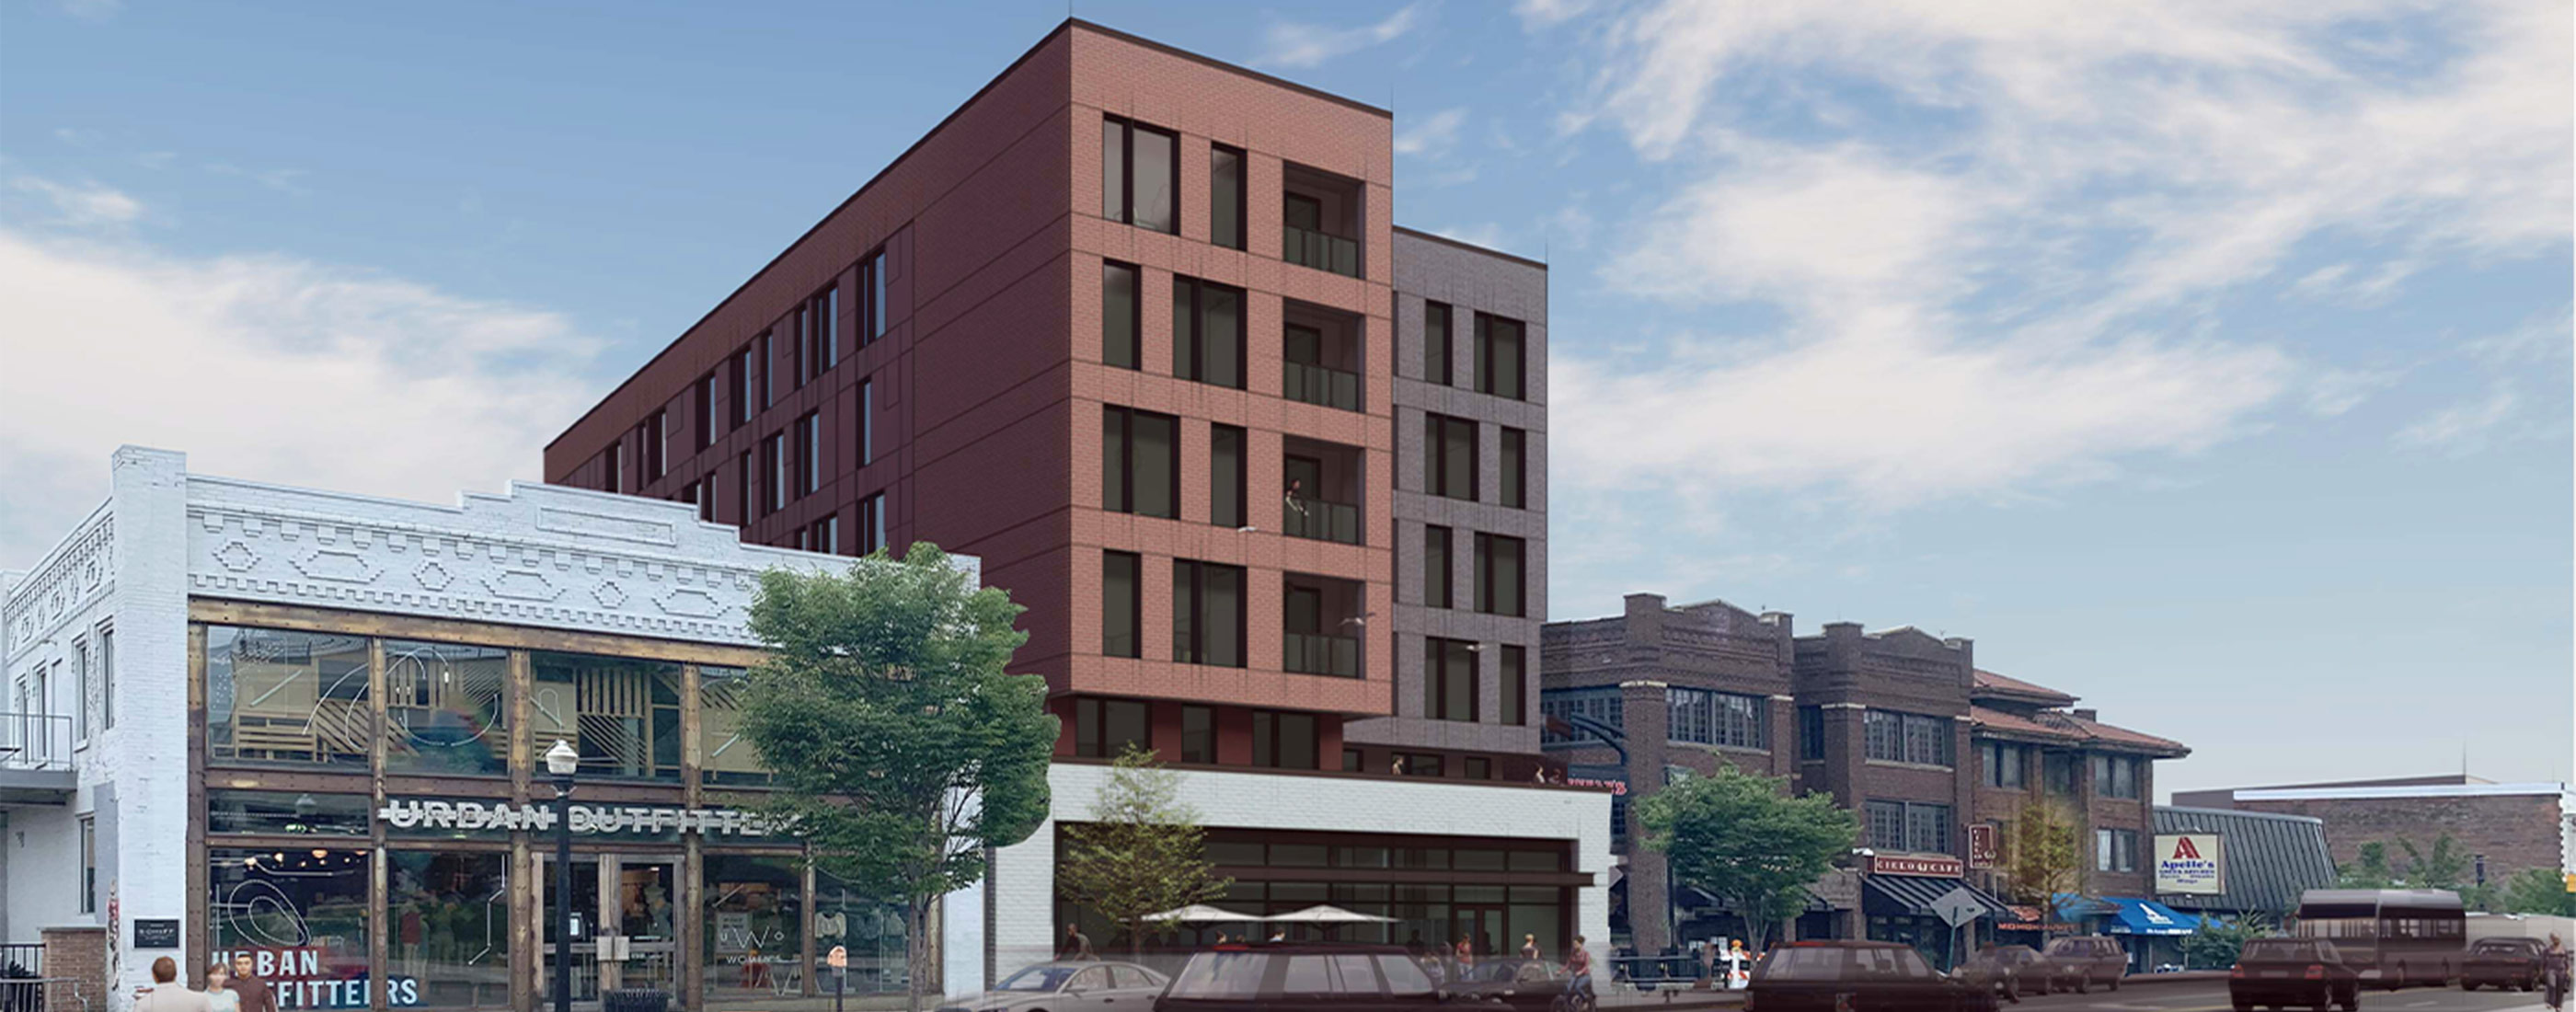 Design rendering of OSU multifamily building on High Street from the front